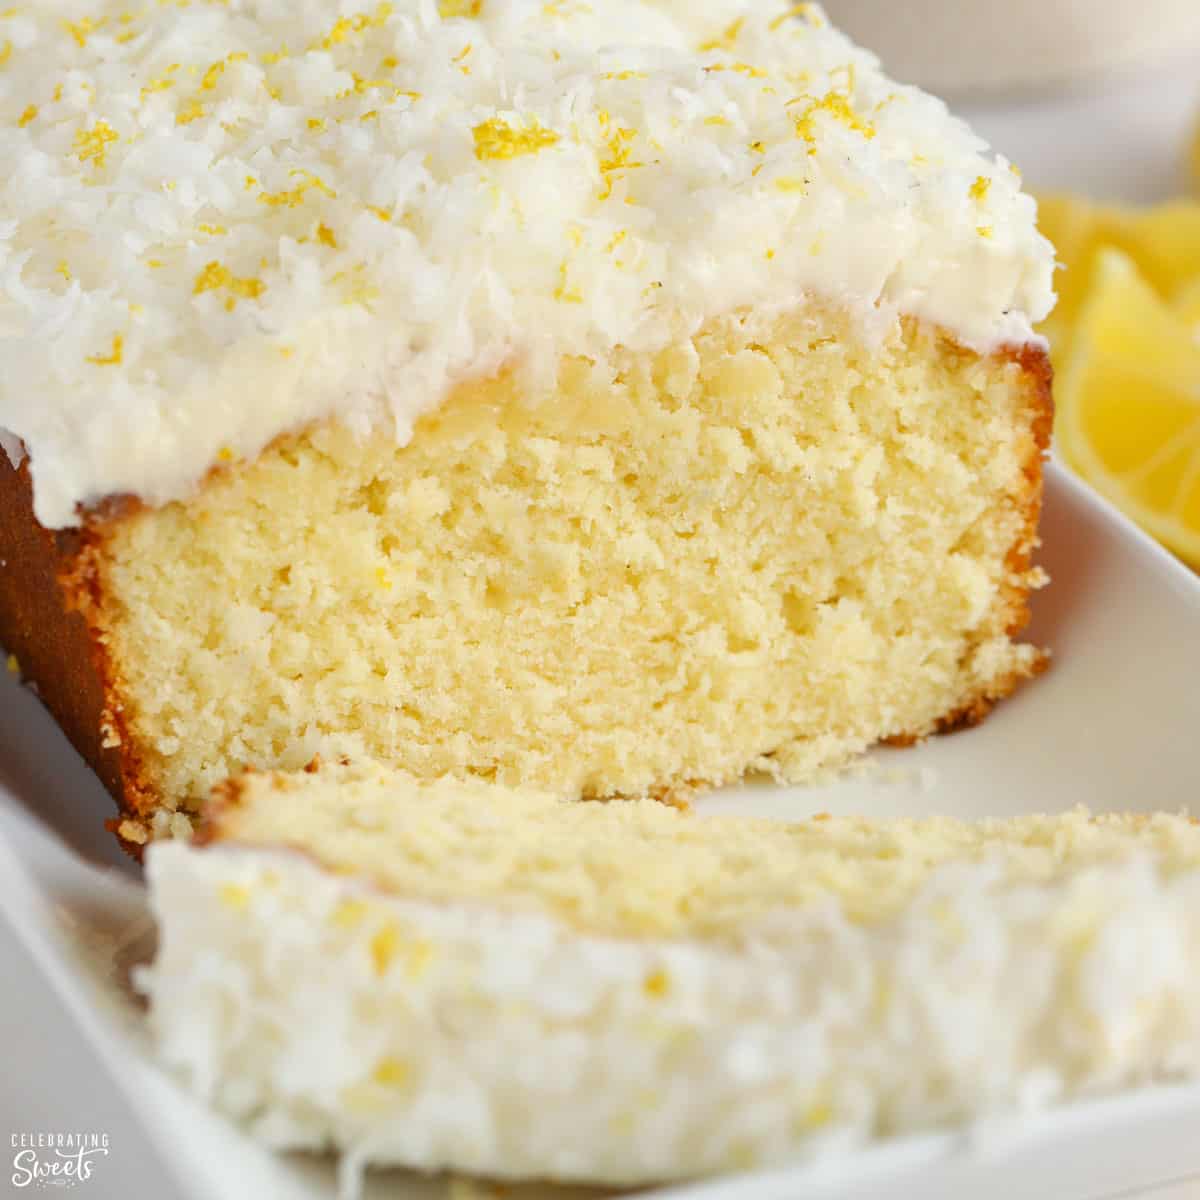 Instant Pot Coconut Cake - One Happy Housewife